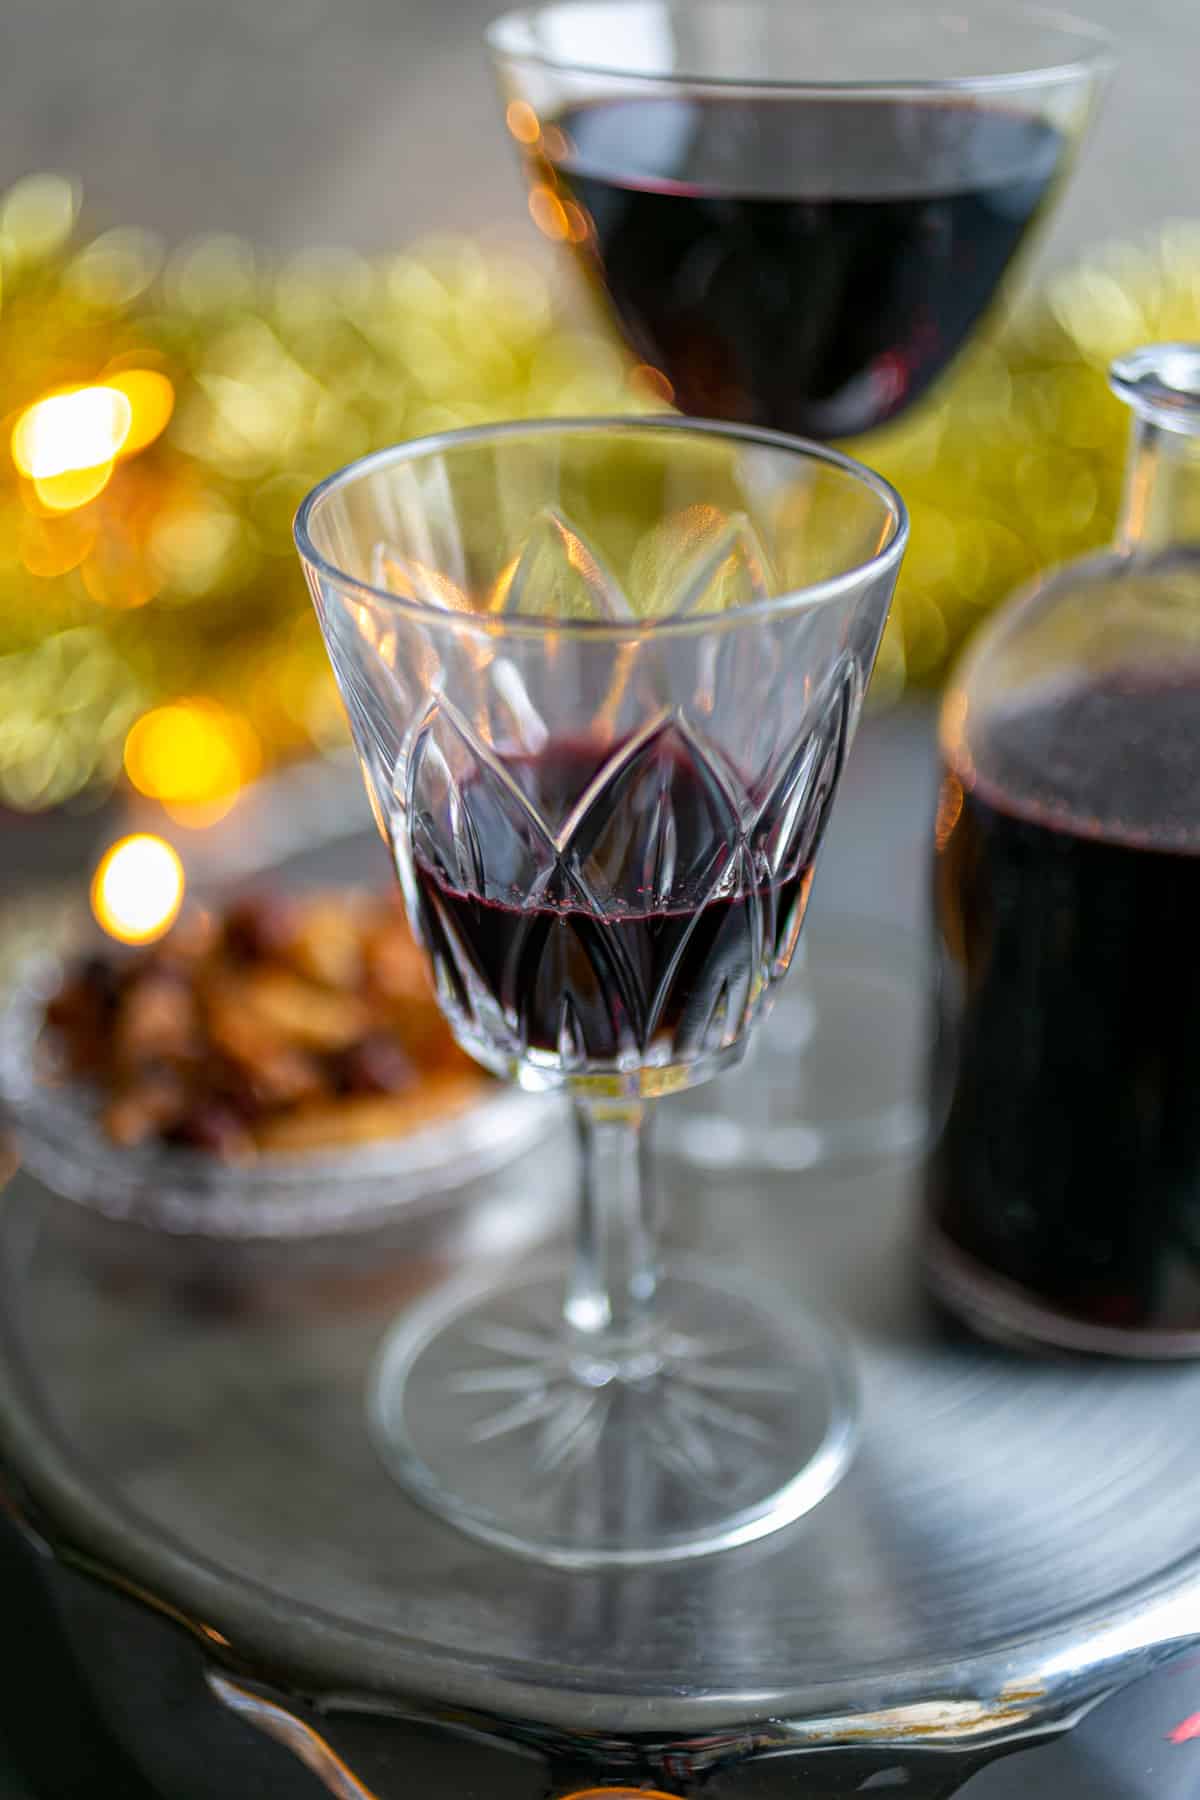 Christmas tinsel and lights surrounding a silver platter of glasses filled with mulled wine